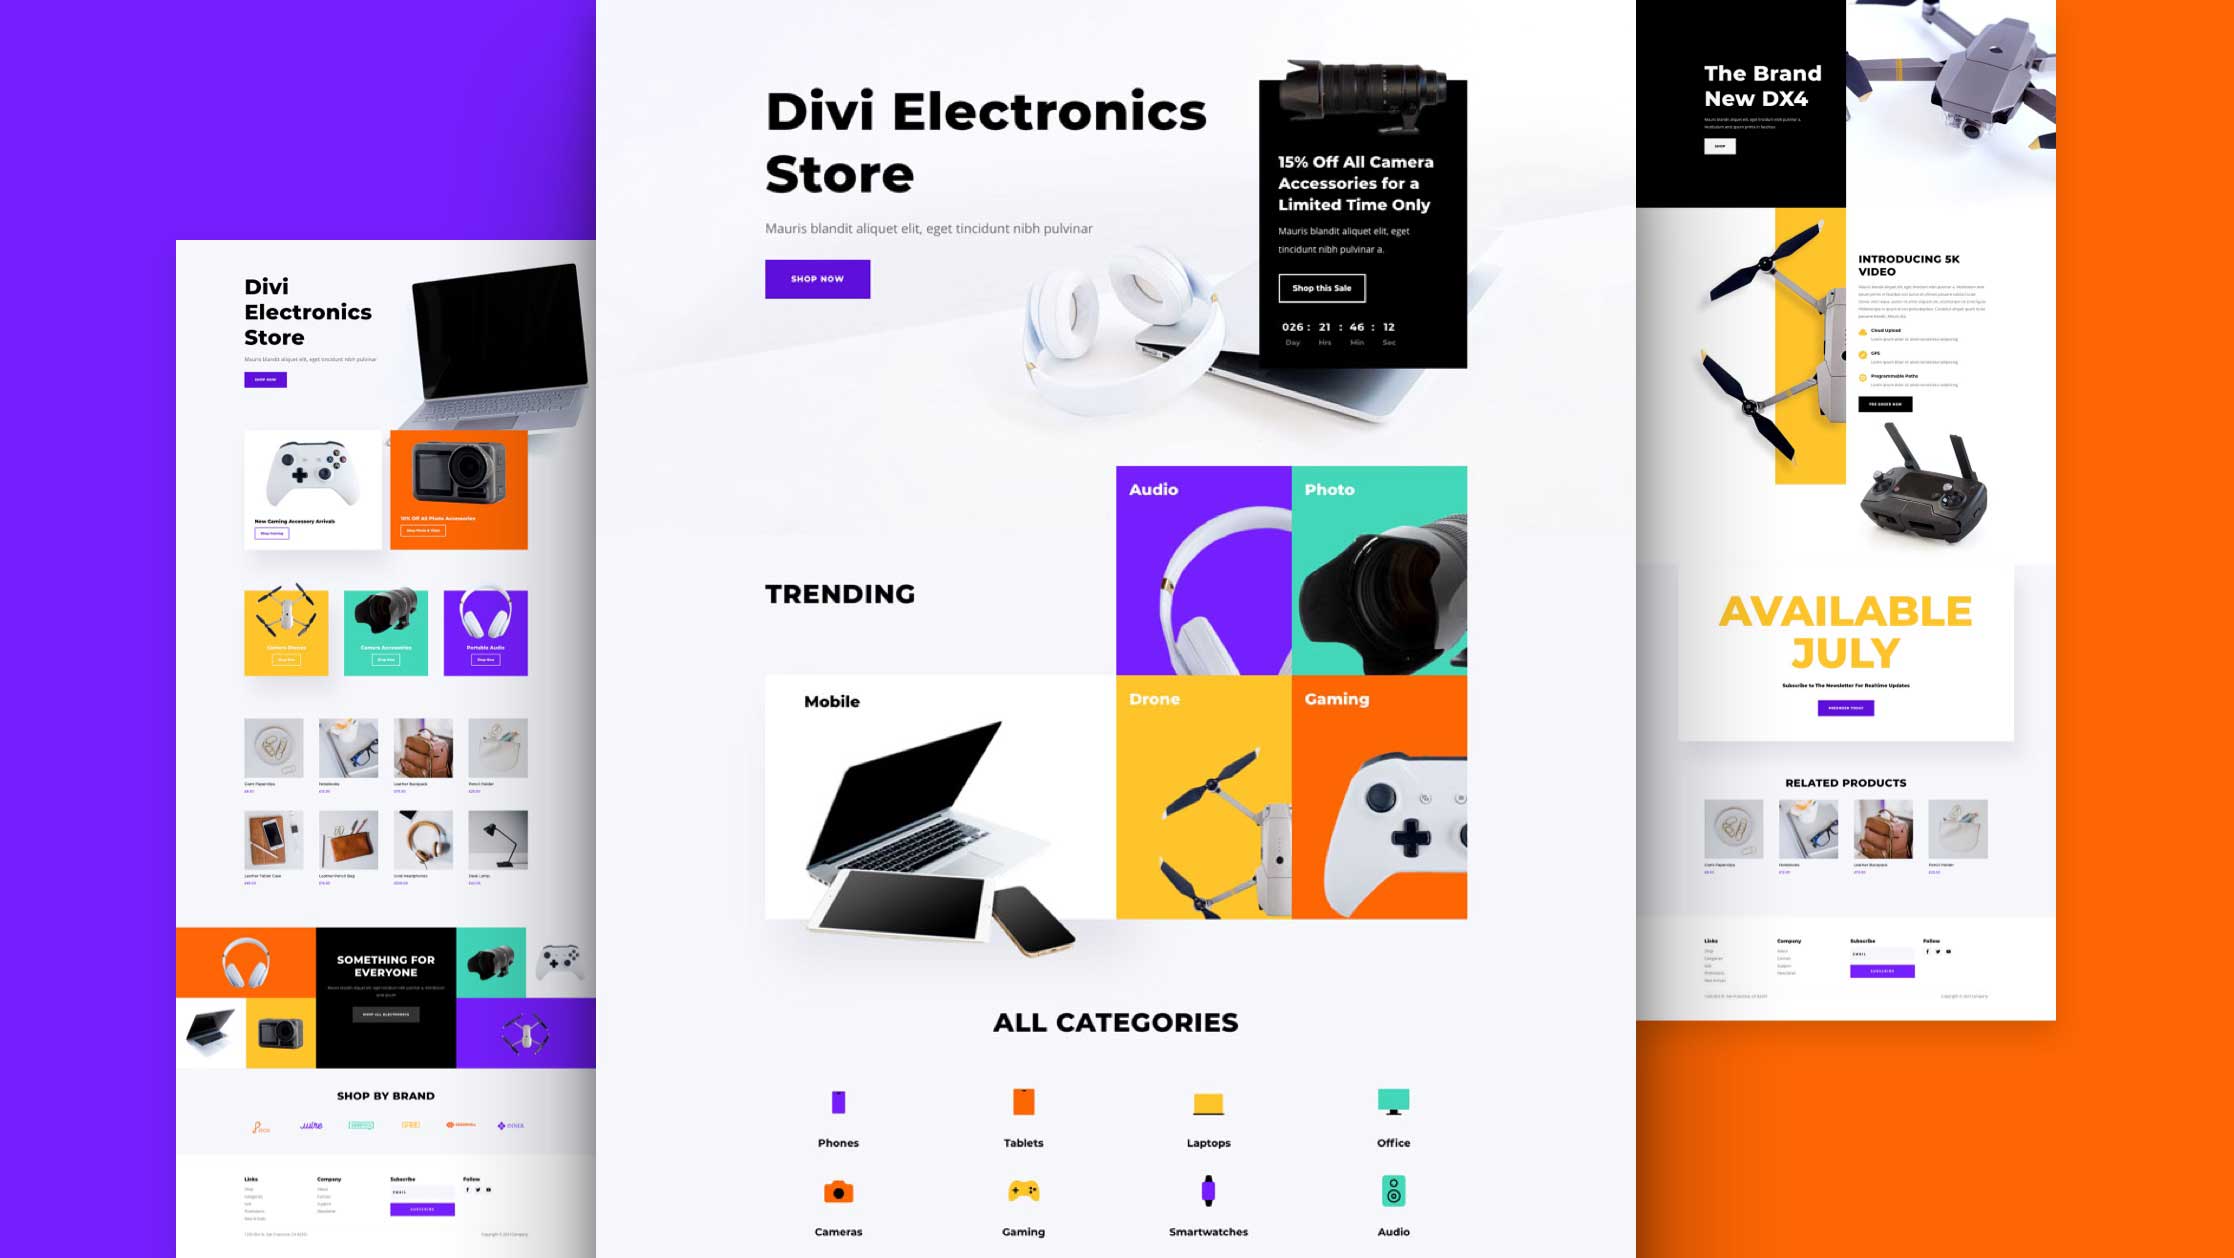 Get a FREE Electronics Store Layout Pack for Divi